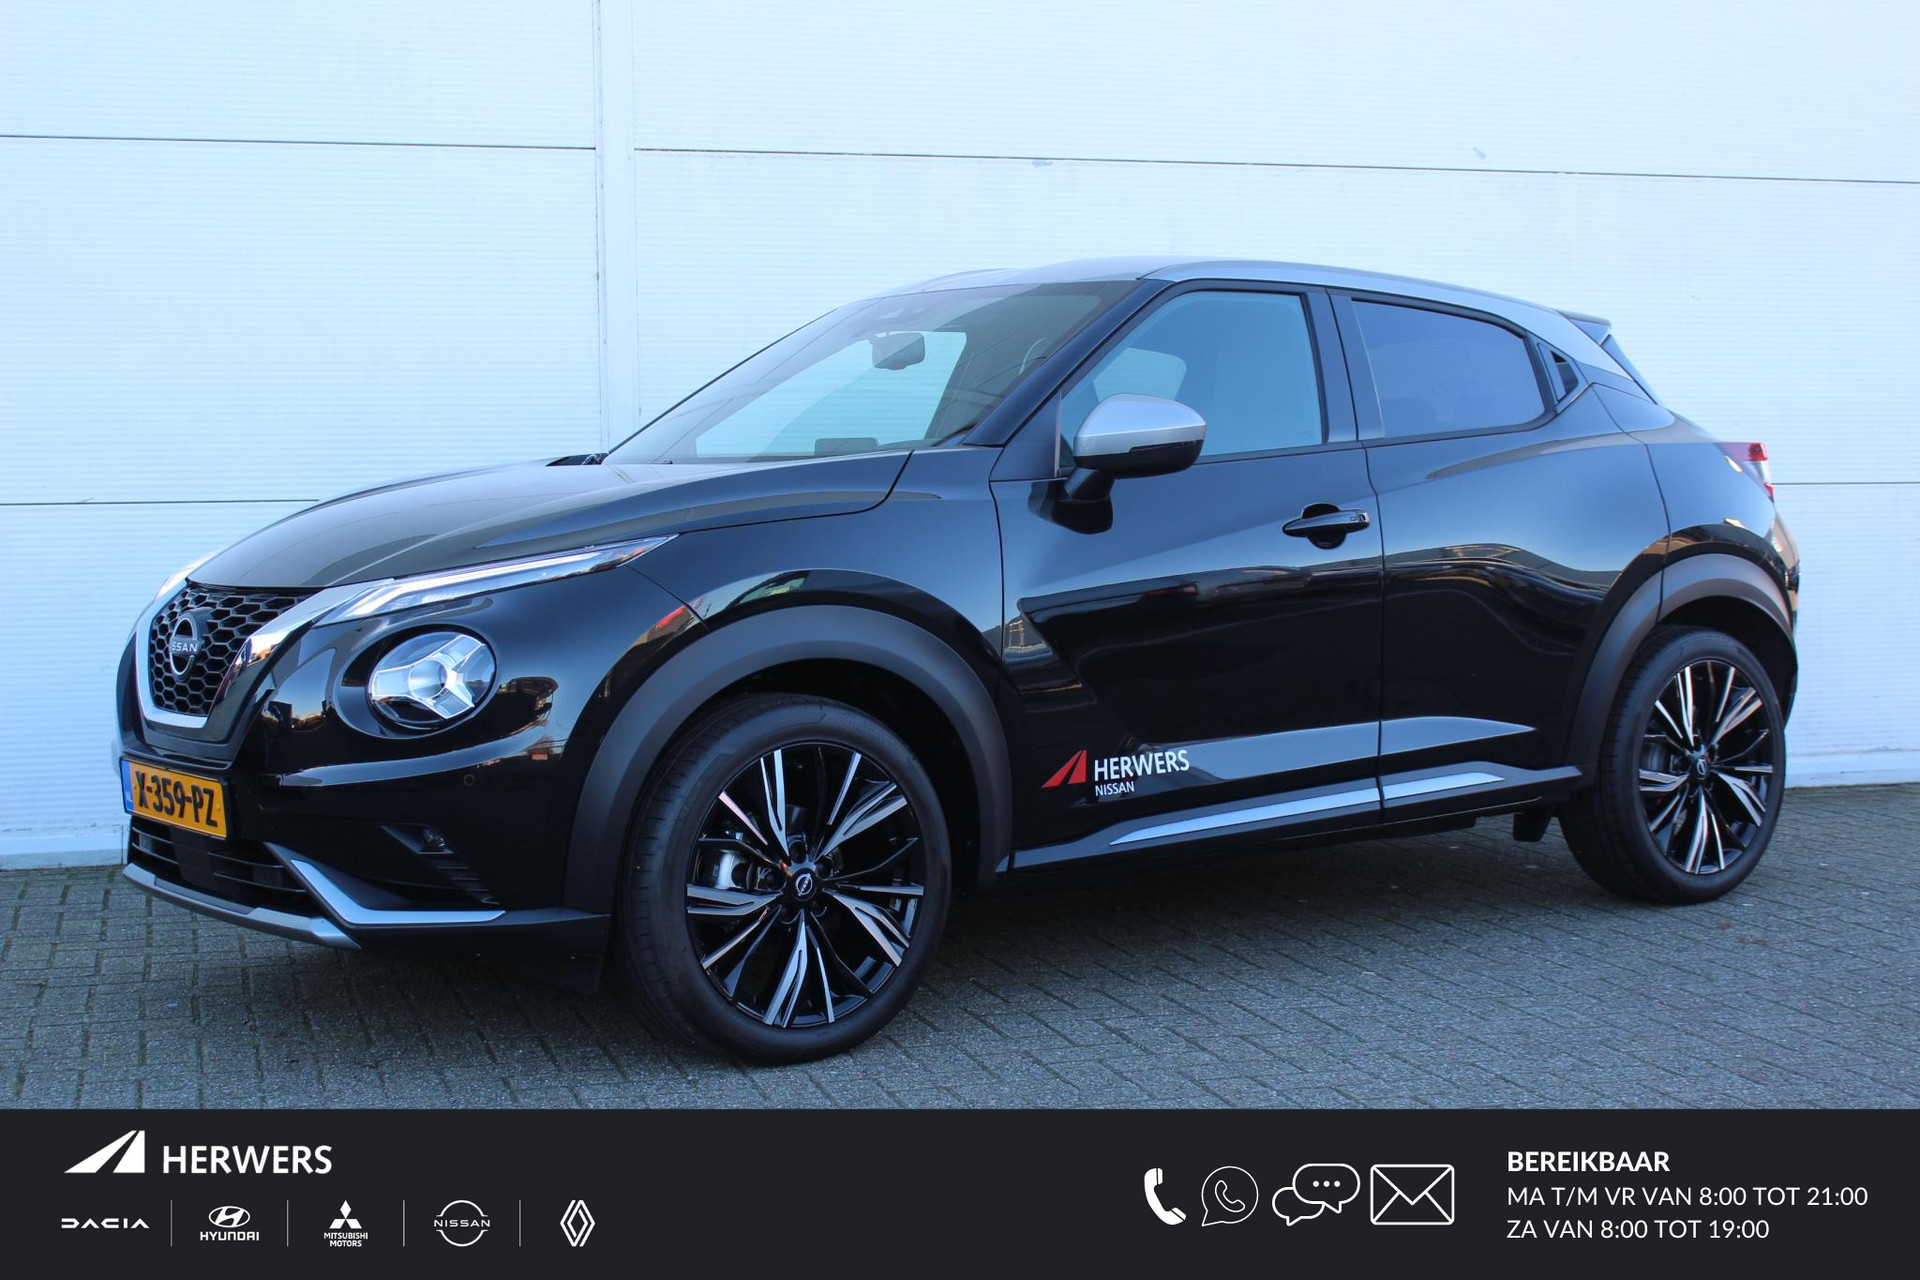 Nissan Juke 1.0 DIG-T 114 N-Design / Navigatie + Apple Carplay/Android Auto / Climate Control / Cruise Control / Achteruitrijcamera / Keyless Entry & Start /